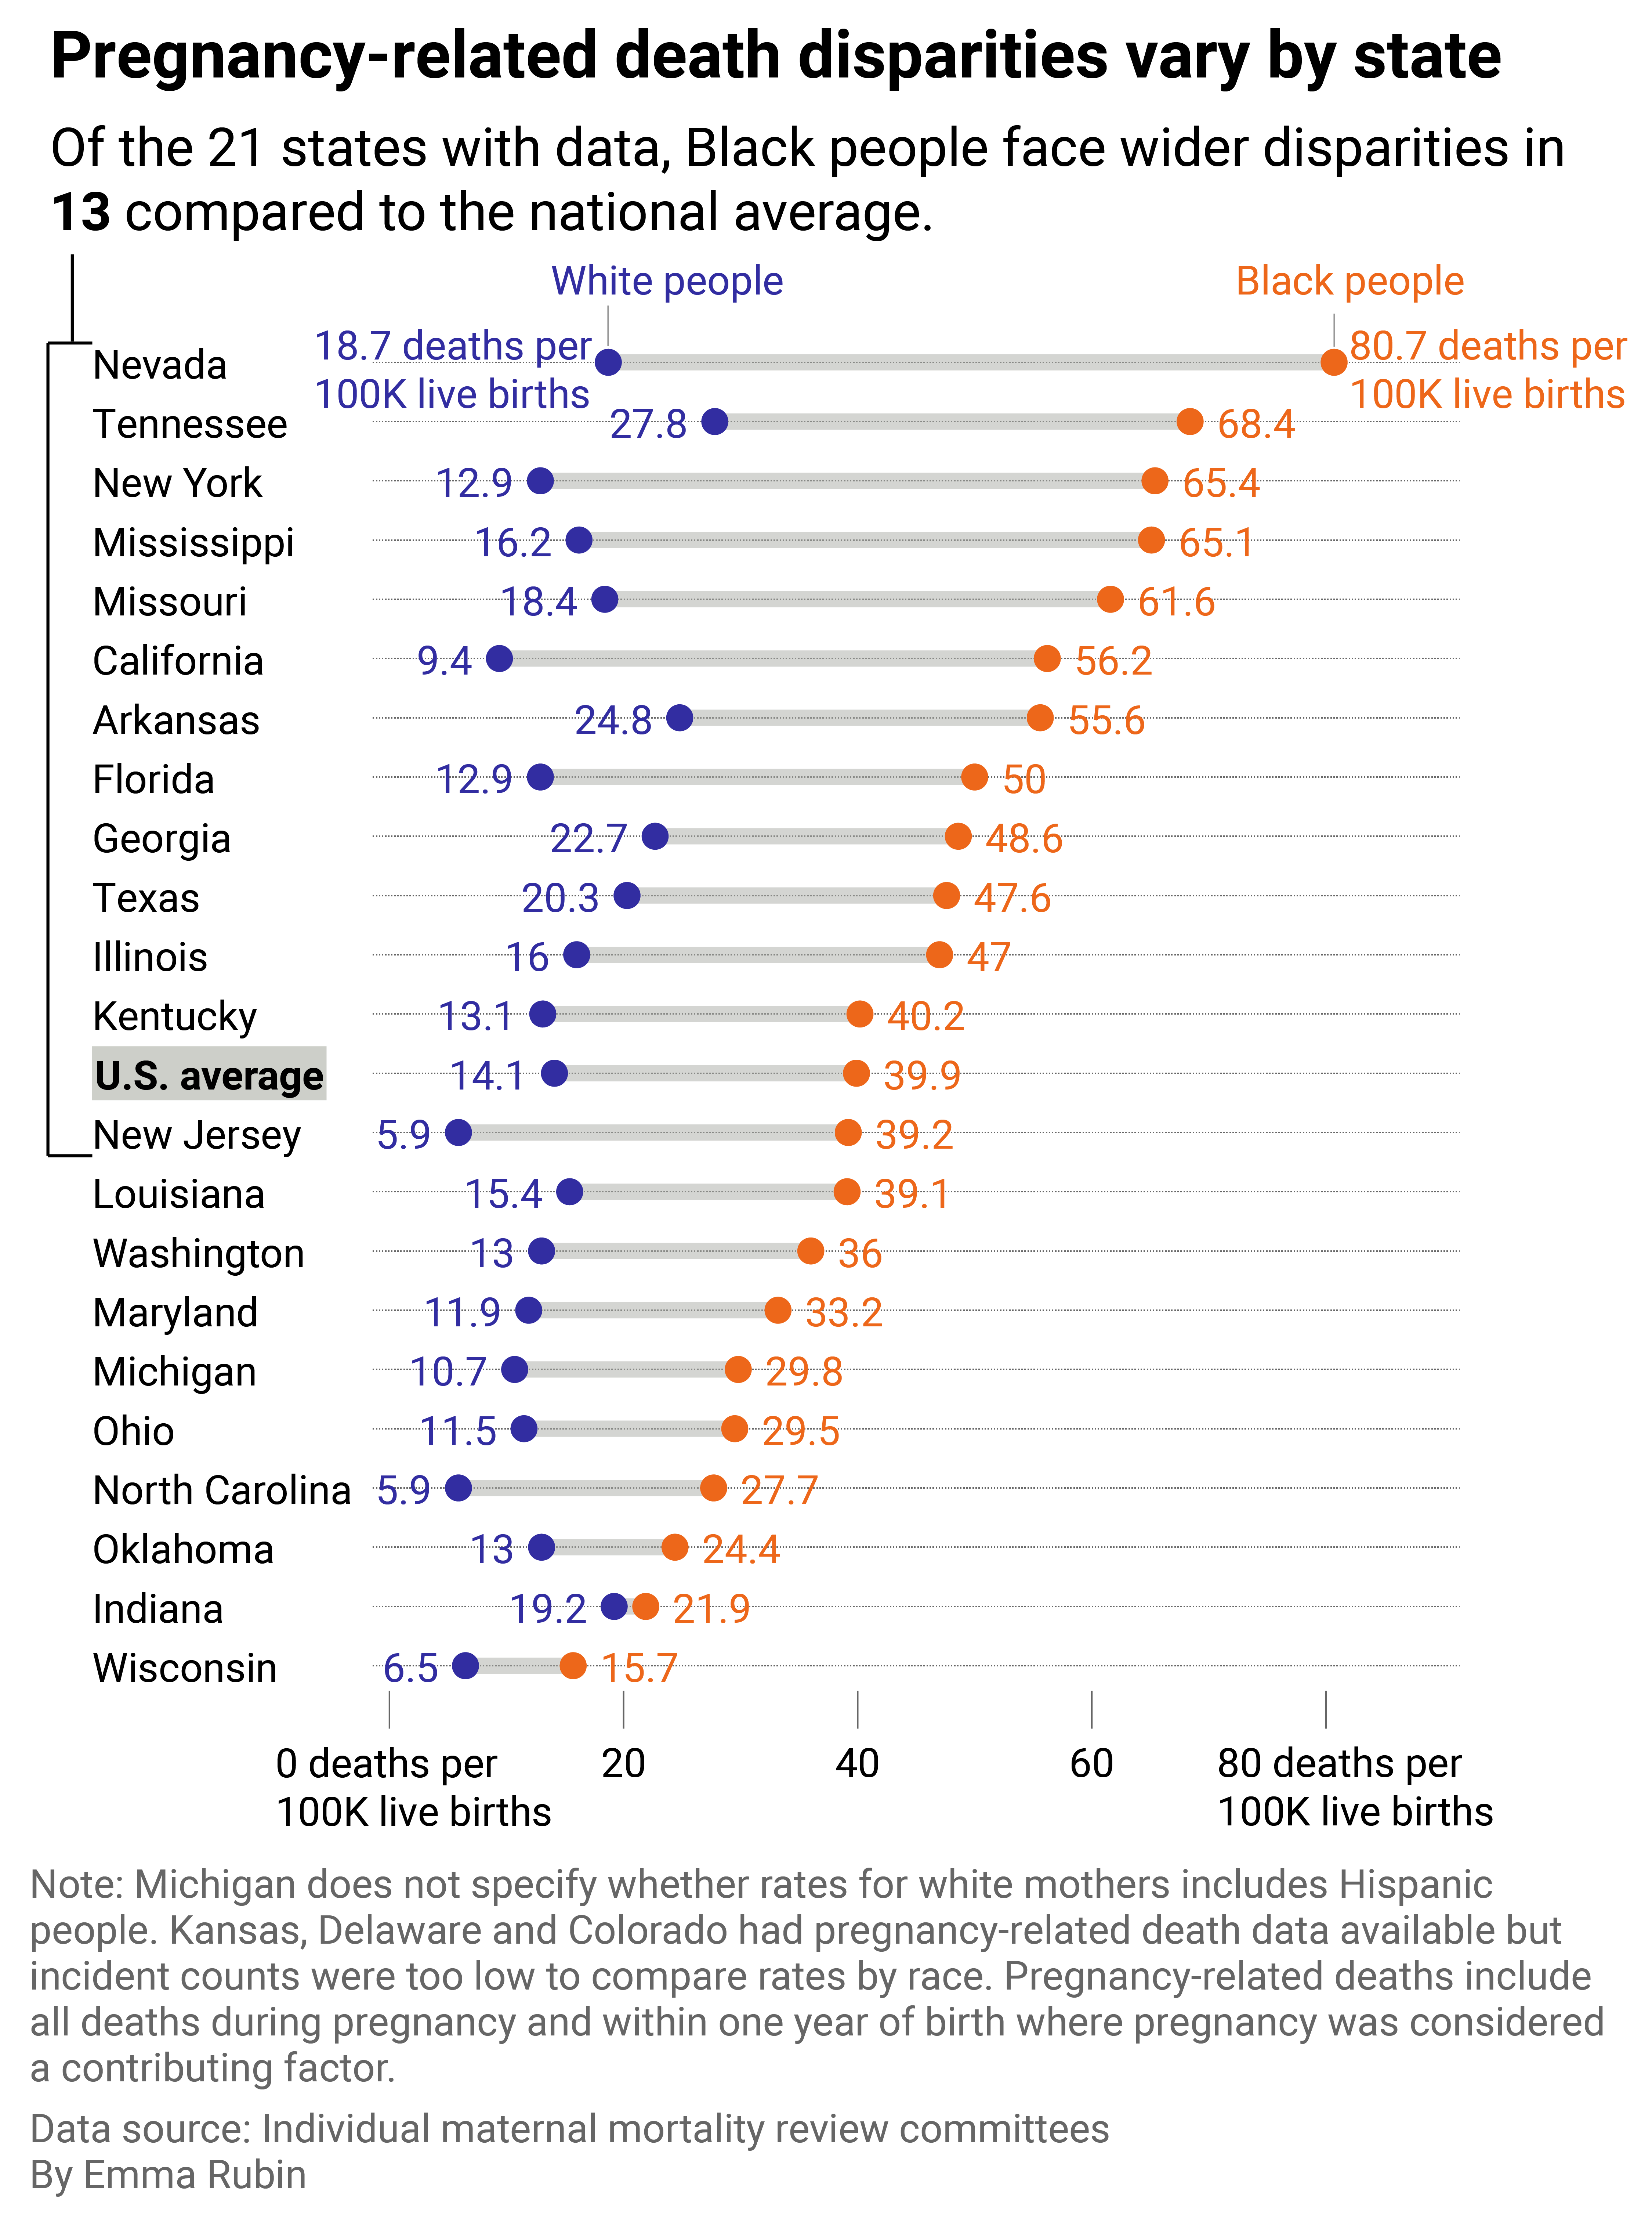 Range plot showing that Nevada and New York have the widest disparities in pregnancy-related deaths for Black versus white mothers.